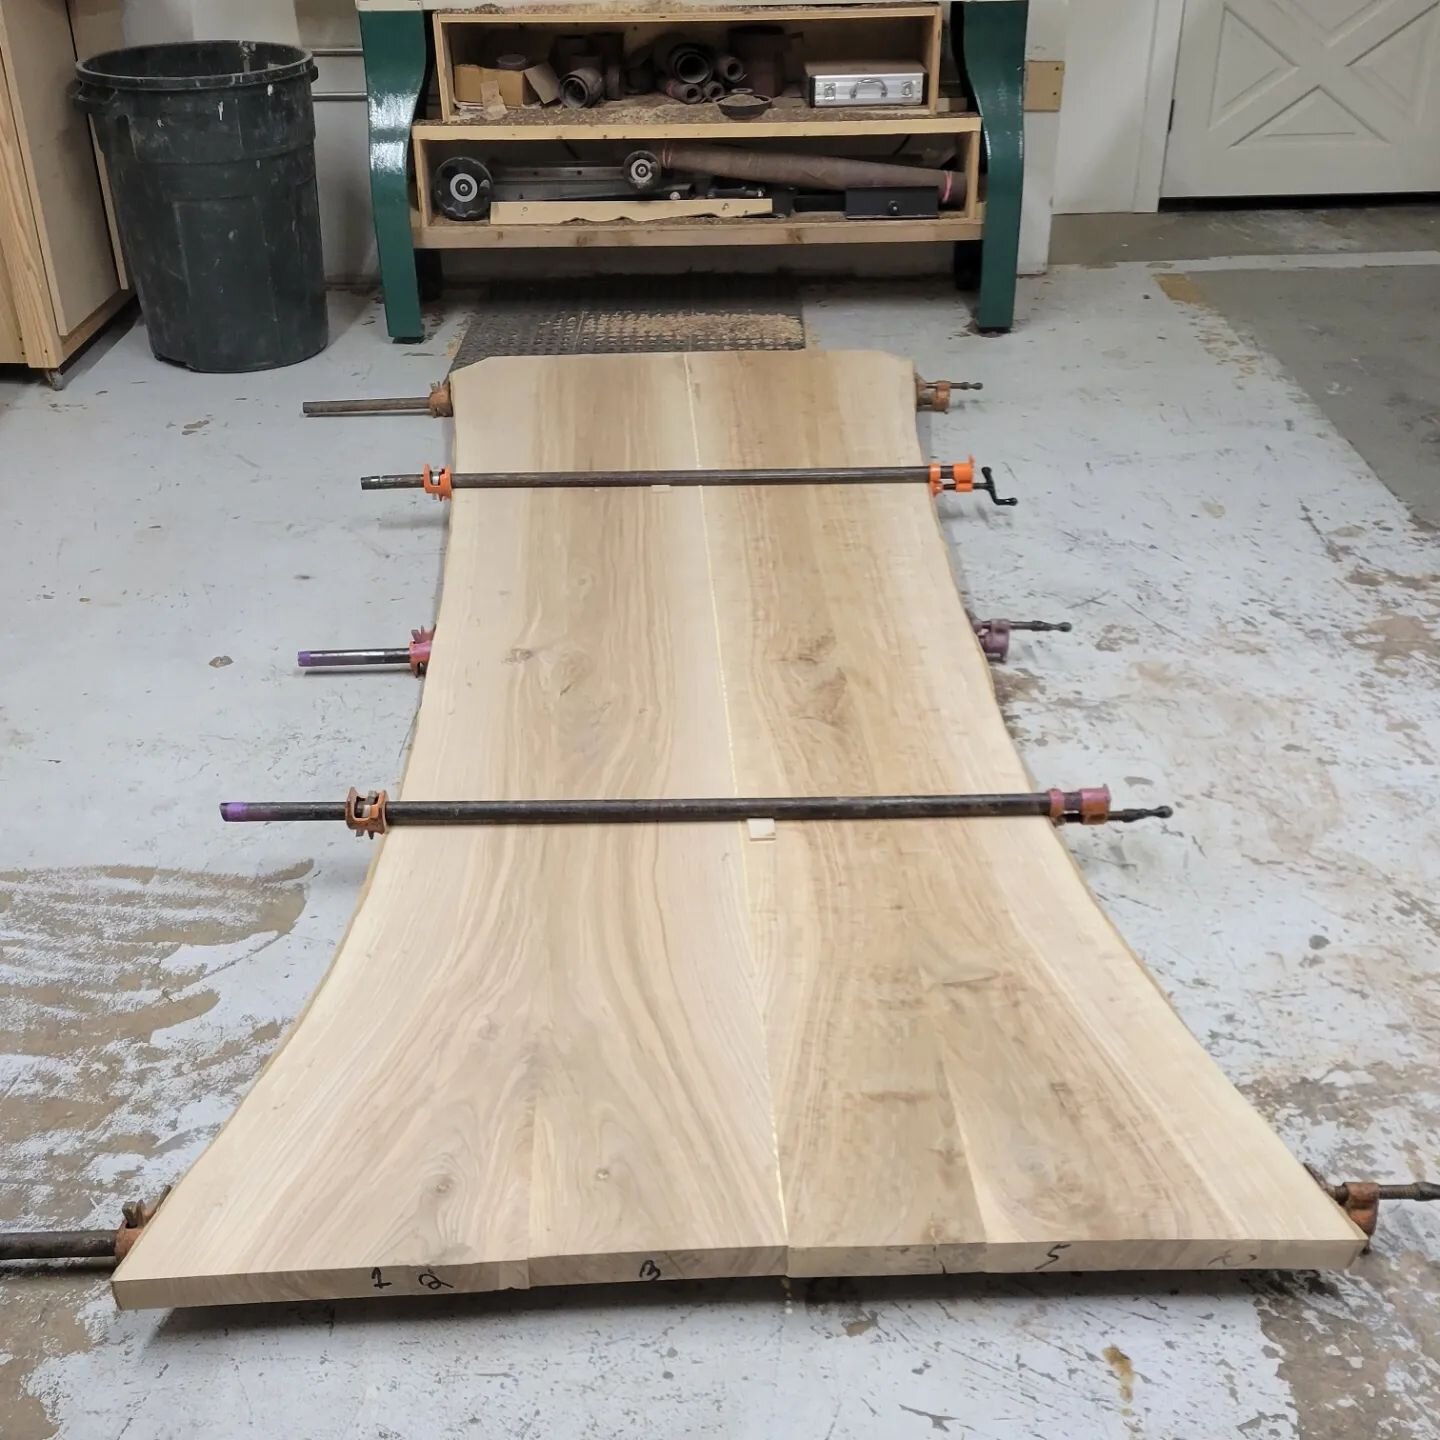 Ash dining table in the clamps.

#woodfurniture #handcrafted #madeinmilwaukee